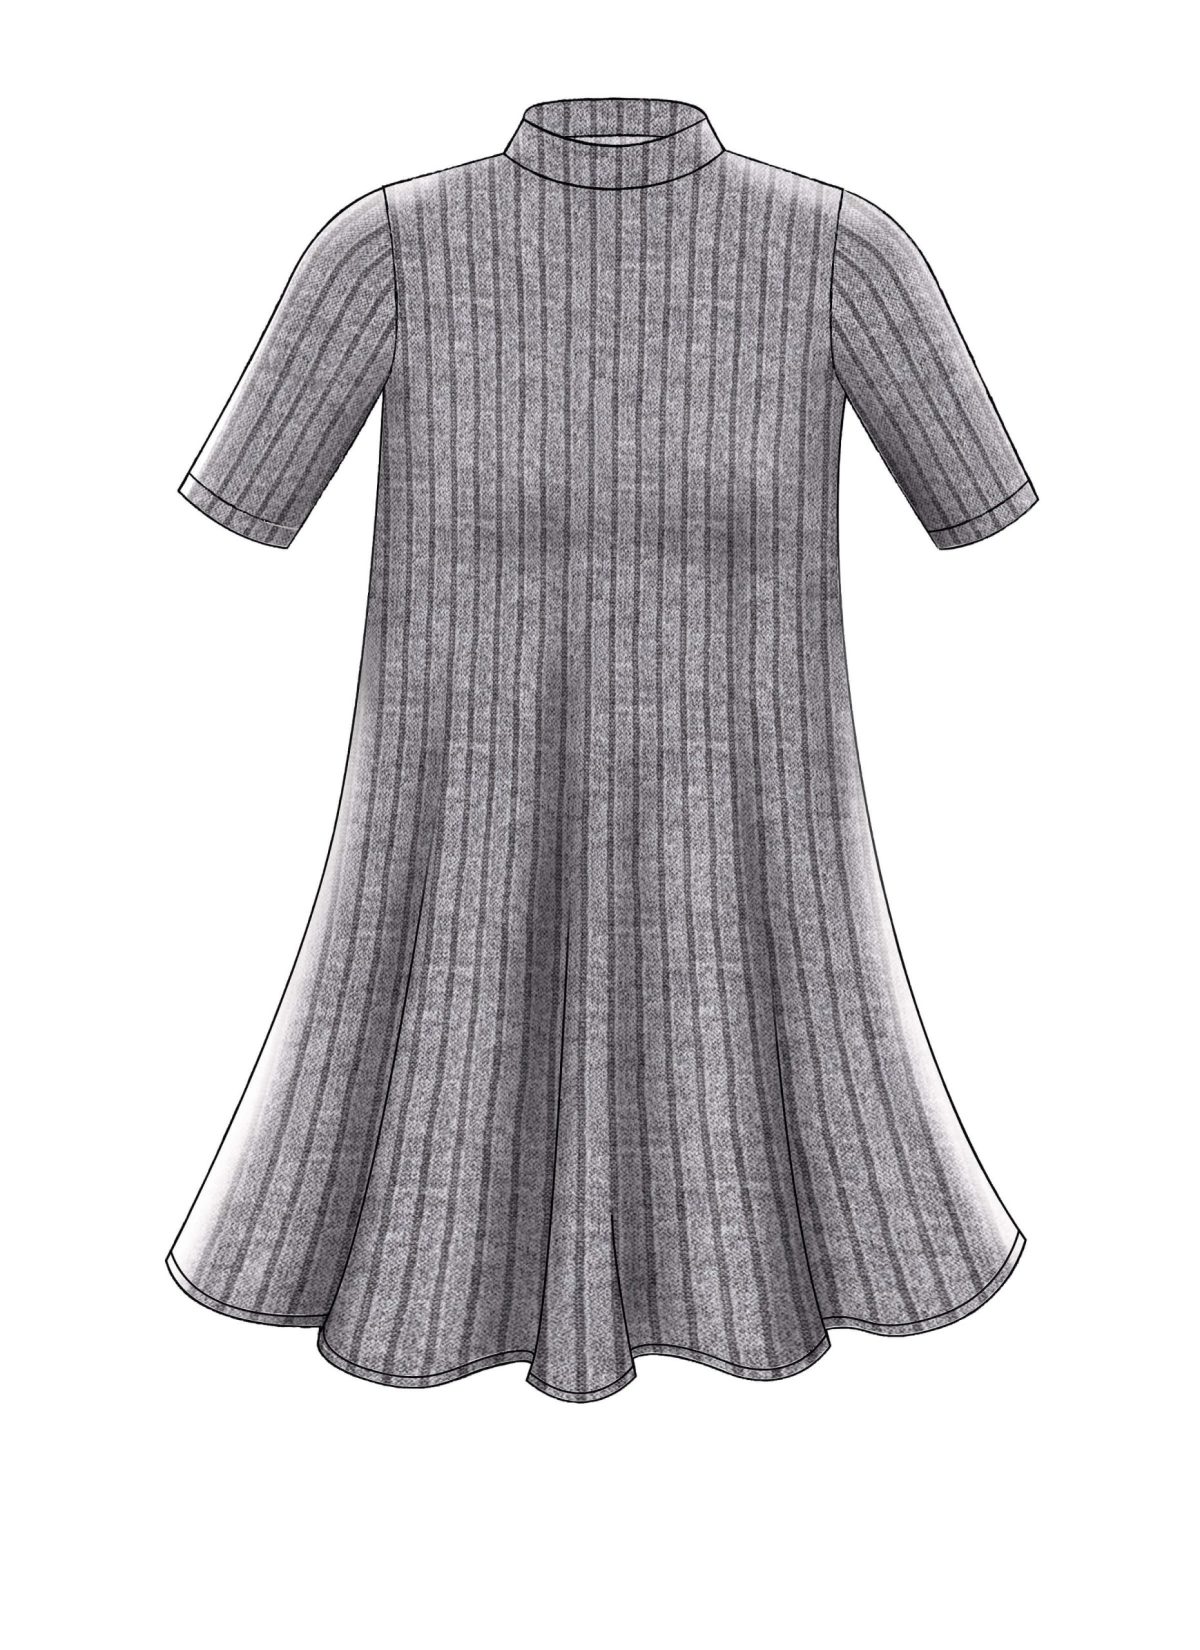 McCall's Sewing Pattern M7622 Misses' Knit Swing Dresses with Neckline and Sleeve Variations